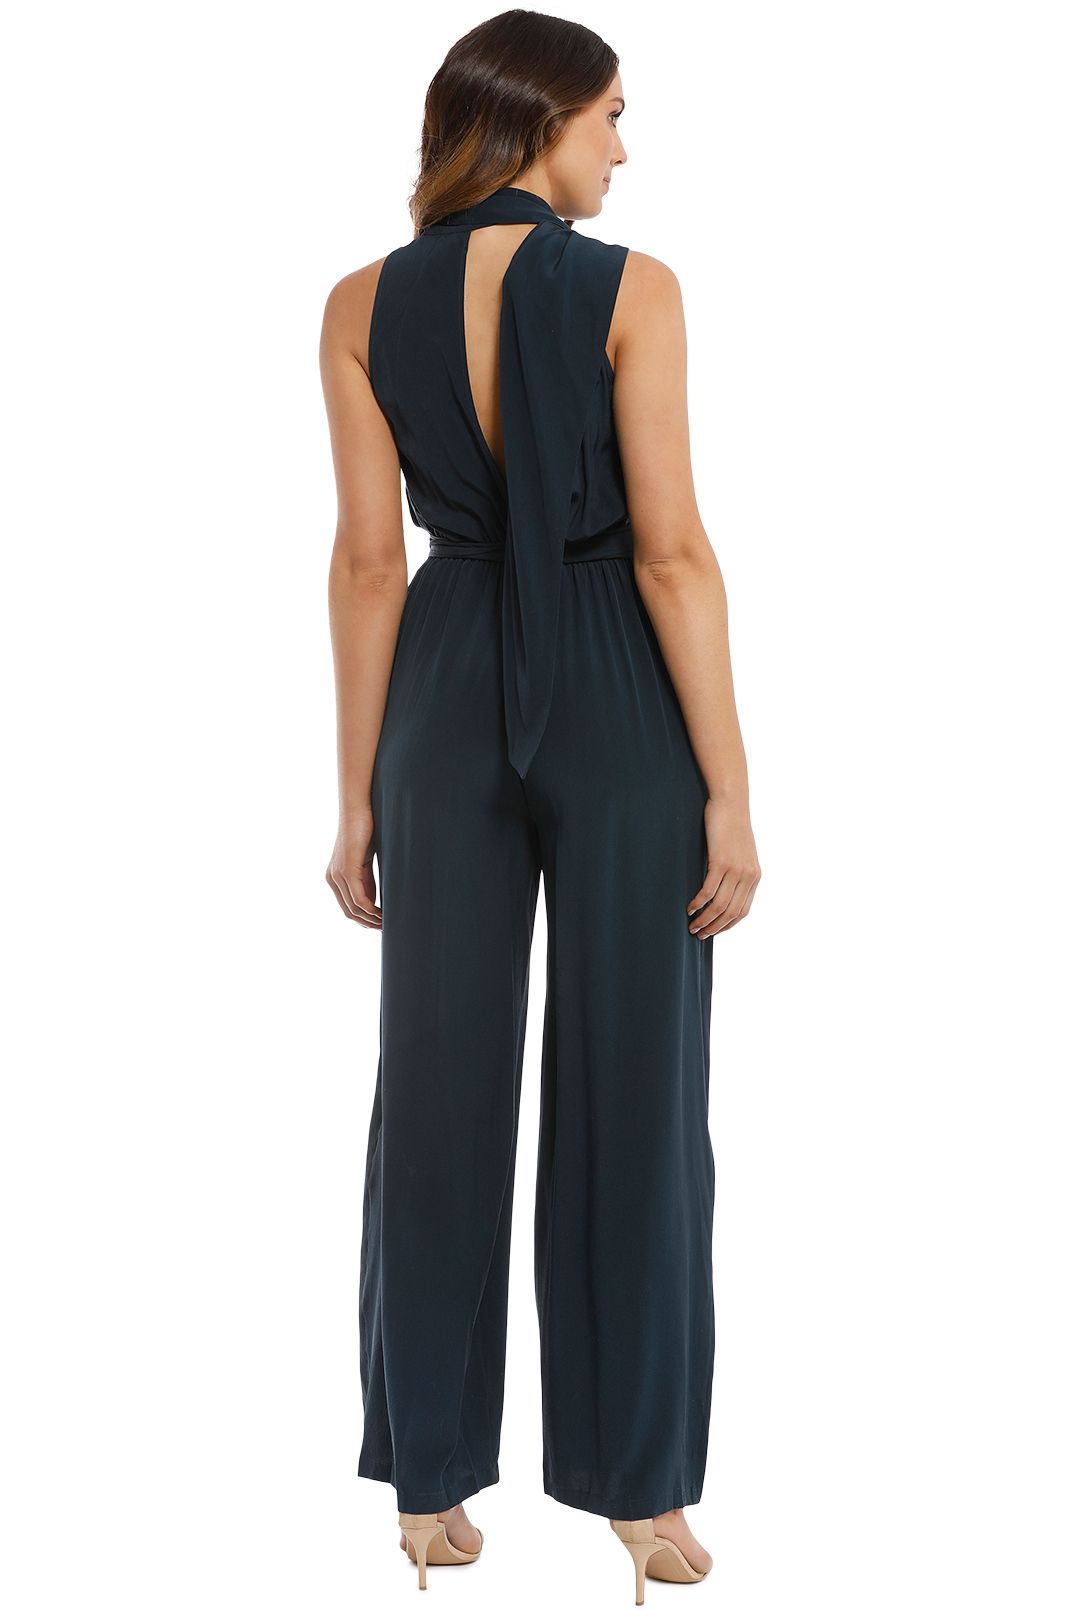 How to Wear a Jumpsuit in Winter, GlamCorner